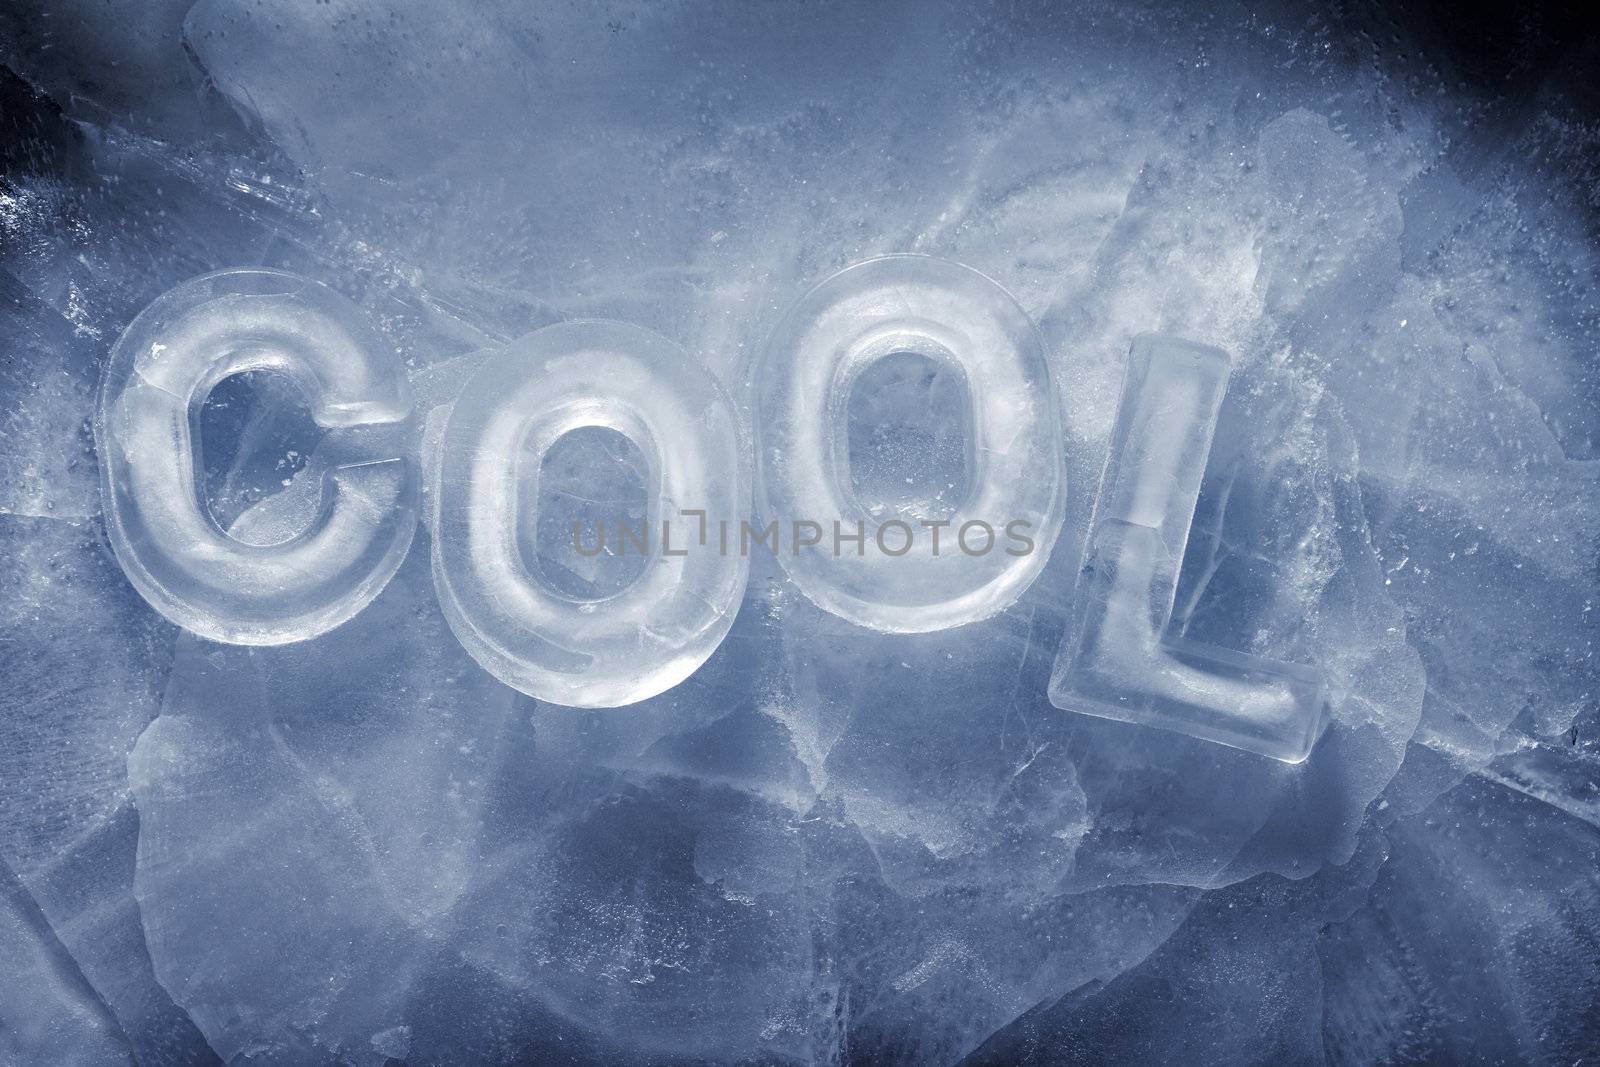 Cool by Stocksnapper